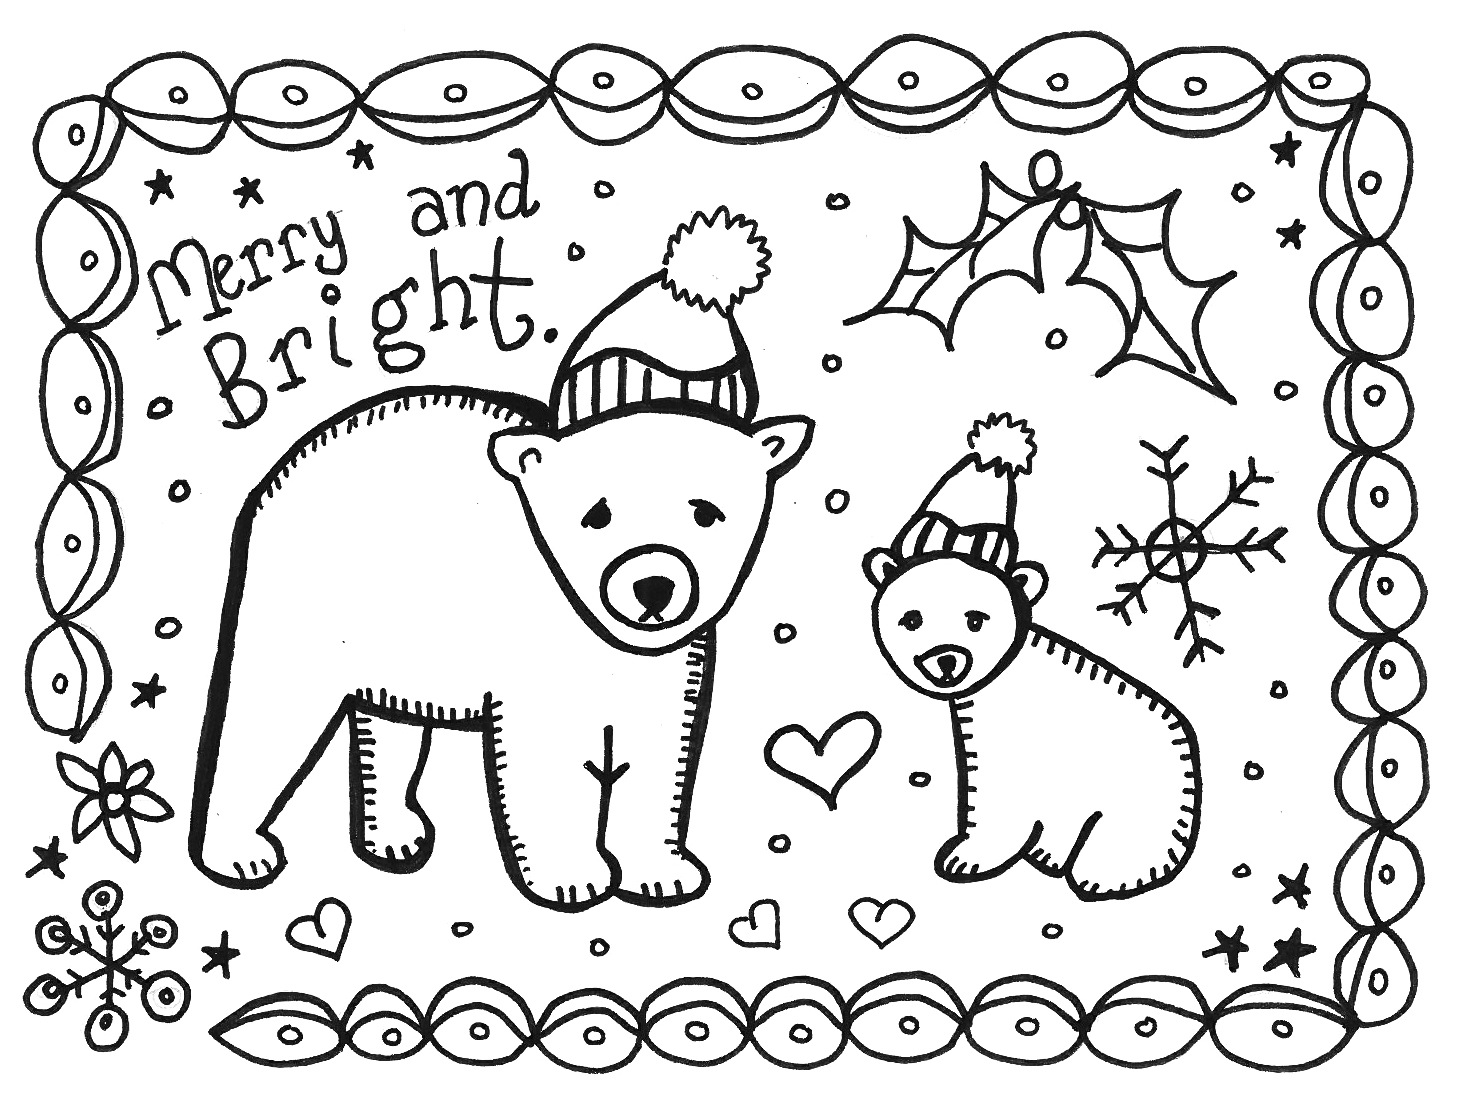 Print and color this card to give - Marcia Beckett